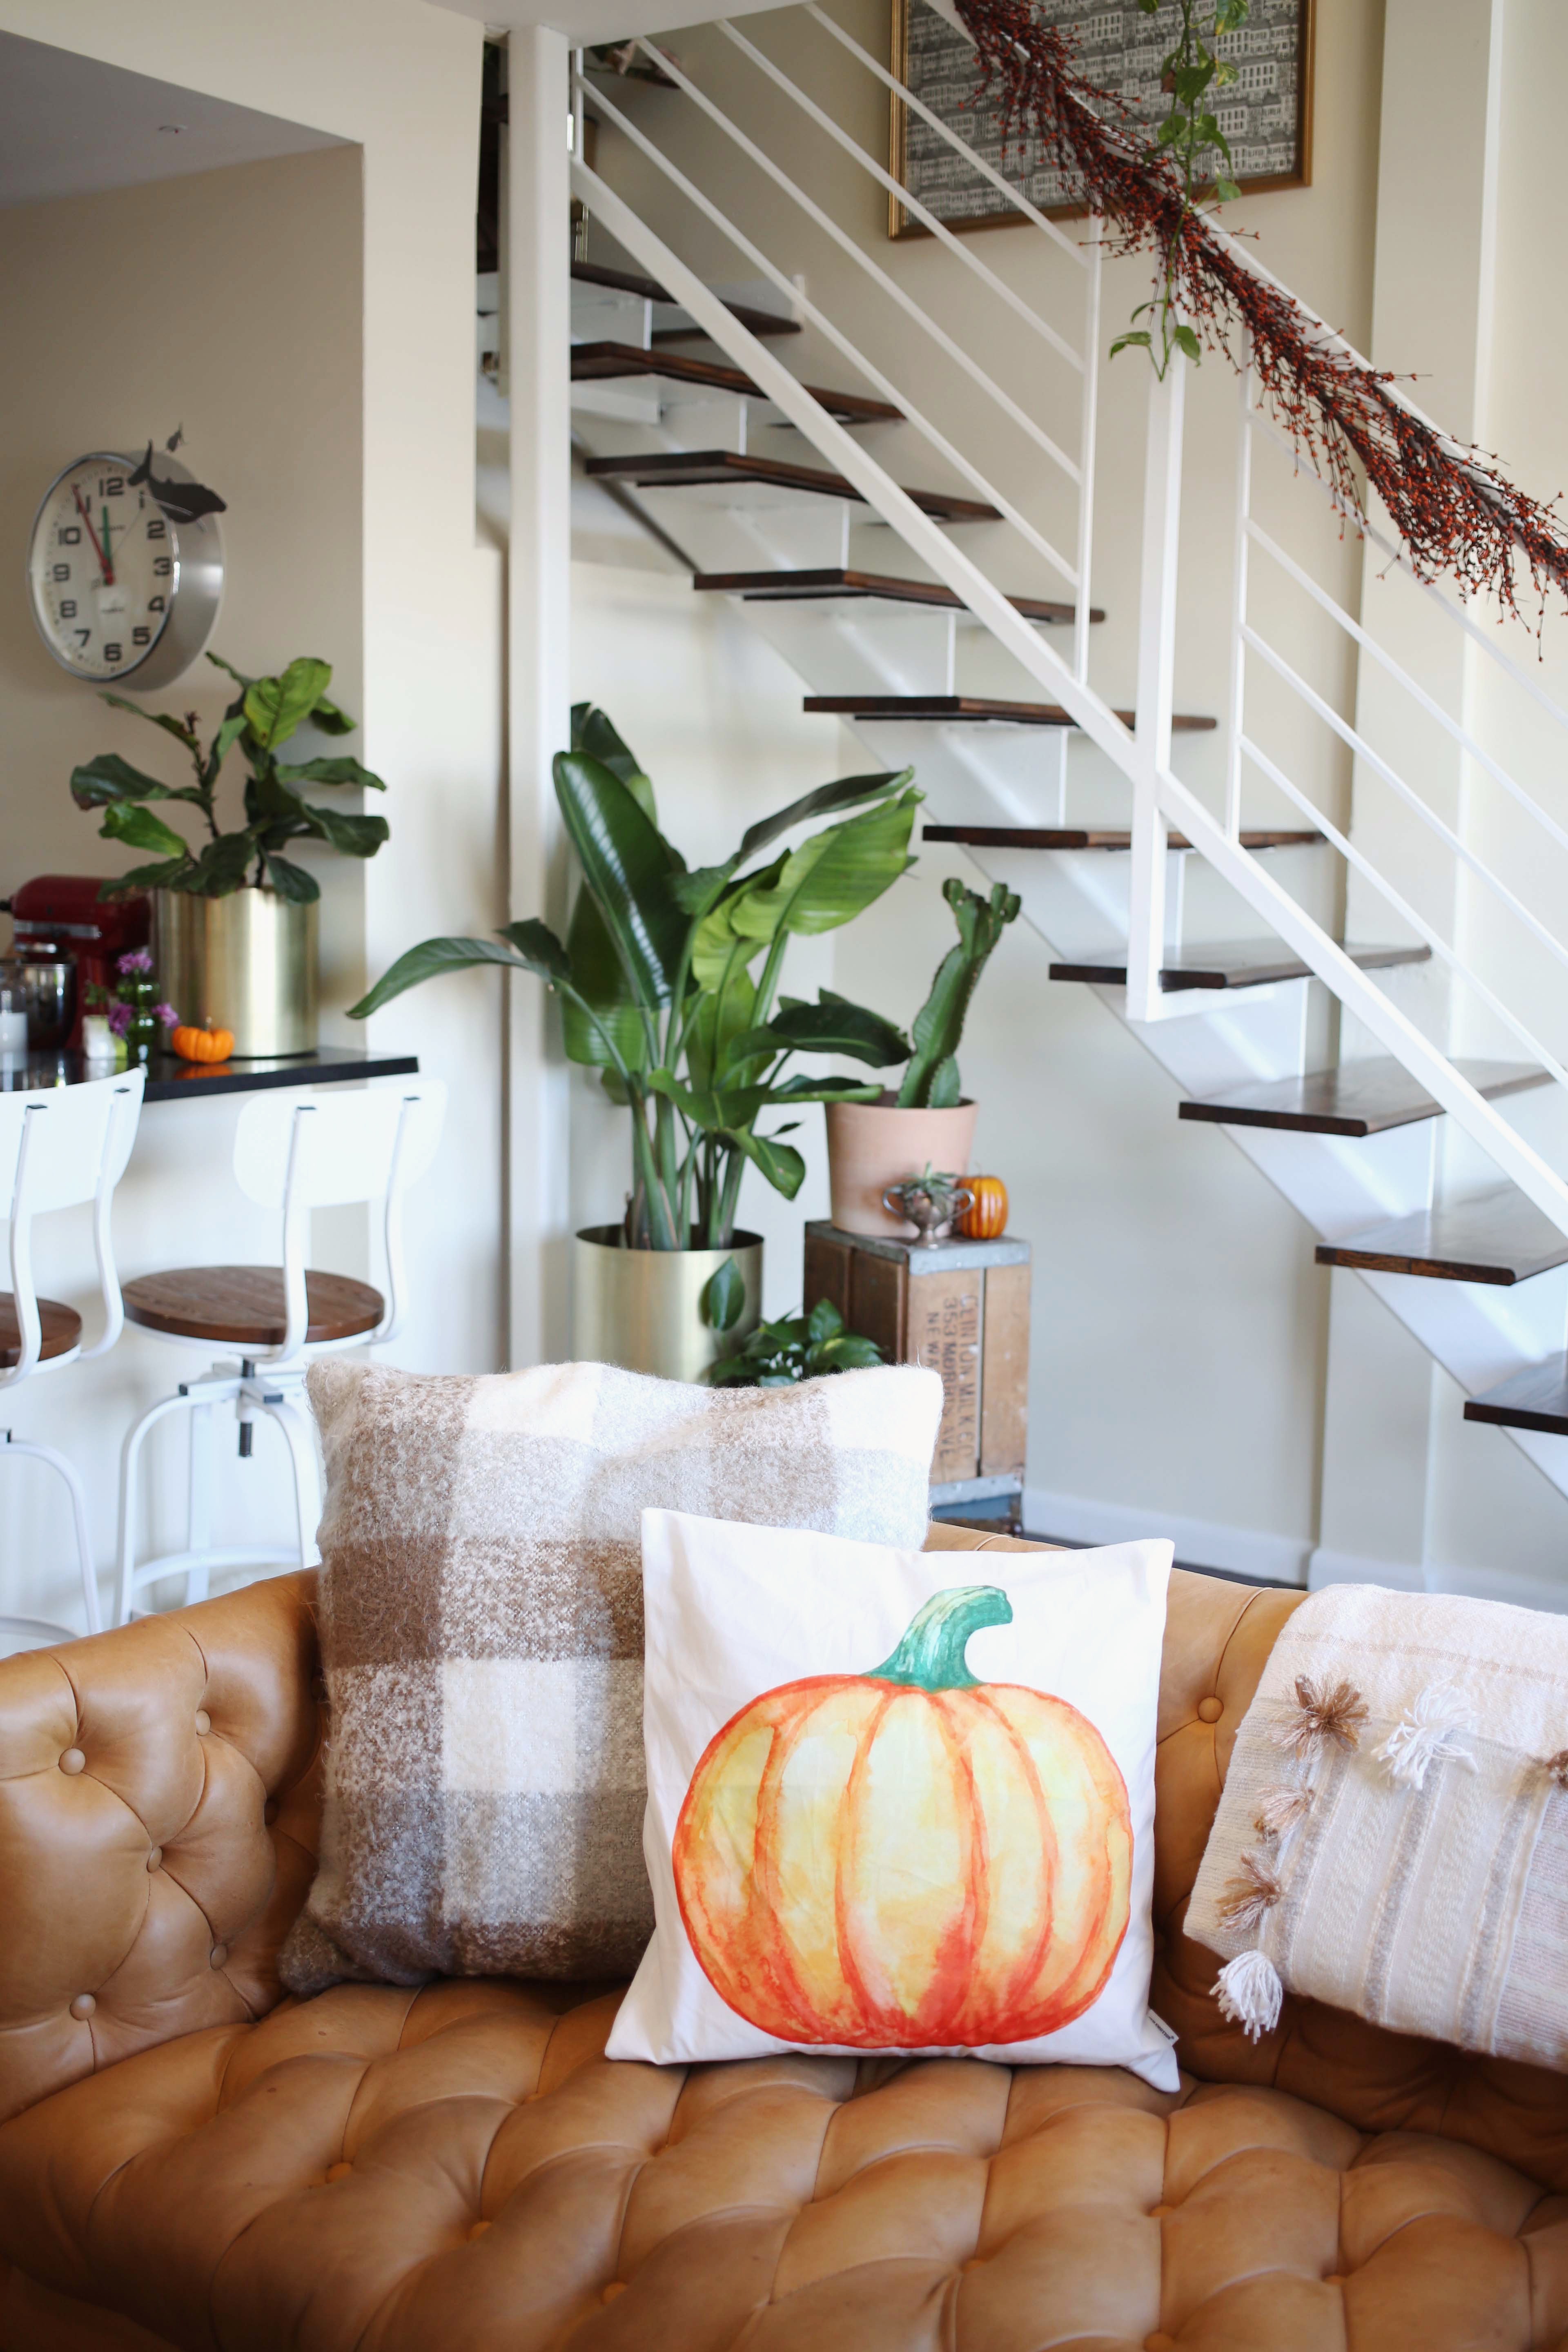 8 fall apartment decor ideas - Noelle's Favorite Things